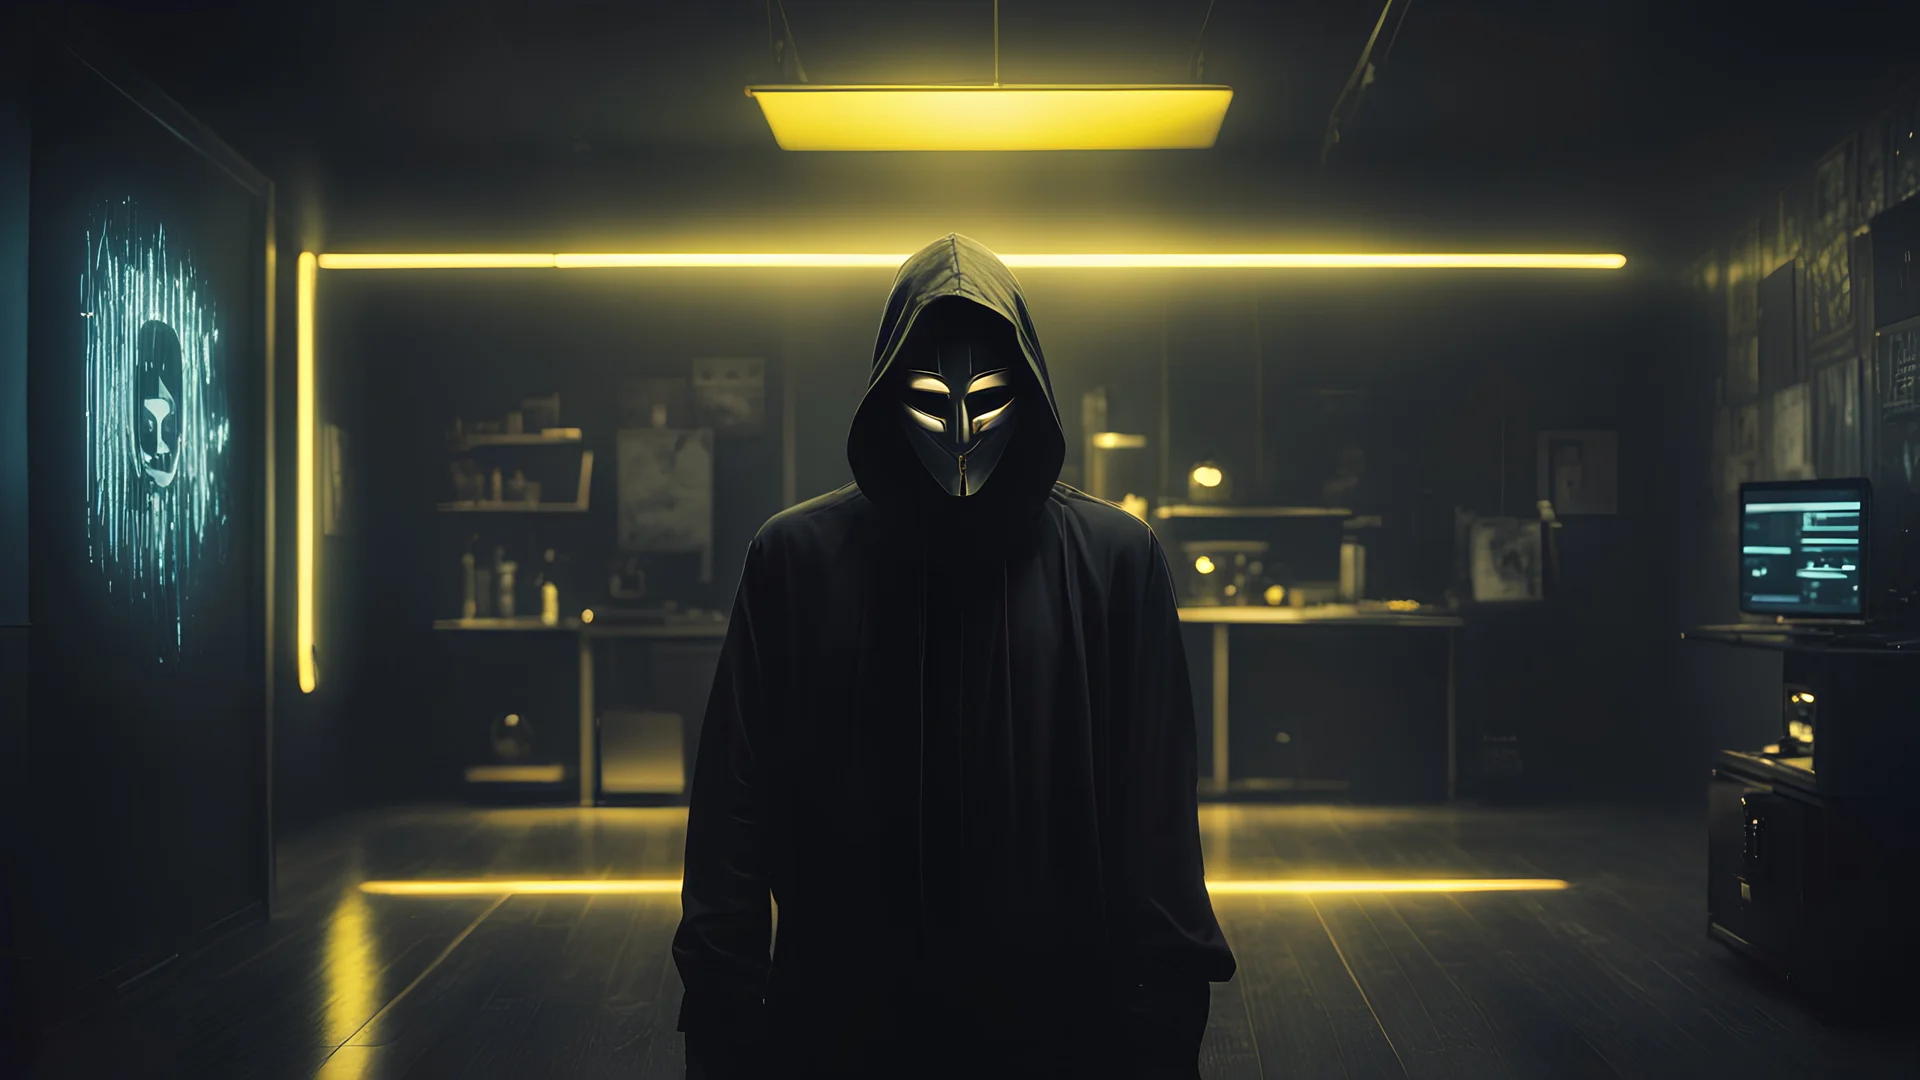 Create an image of a mysterious character dressed in black clothes, with no visible face, instead wearing an anonymous Guy Fawkes mask. The setting is a YouTuber’s room with a dark, moody vibe, enhanced by yellow LED or holographic lights. Include elements reminiscent of the Matrix, such as digital rain or code streams in the background. The room should have typical YouTuber attributes like a gaming chair, a computer setup with multiple monitors, and dimly lit by the ambient lights. 4k resolutio